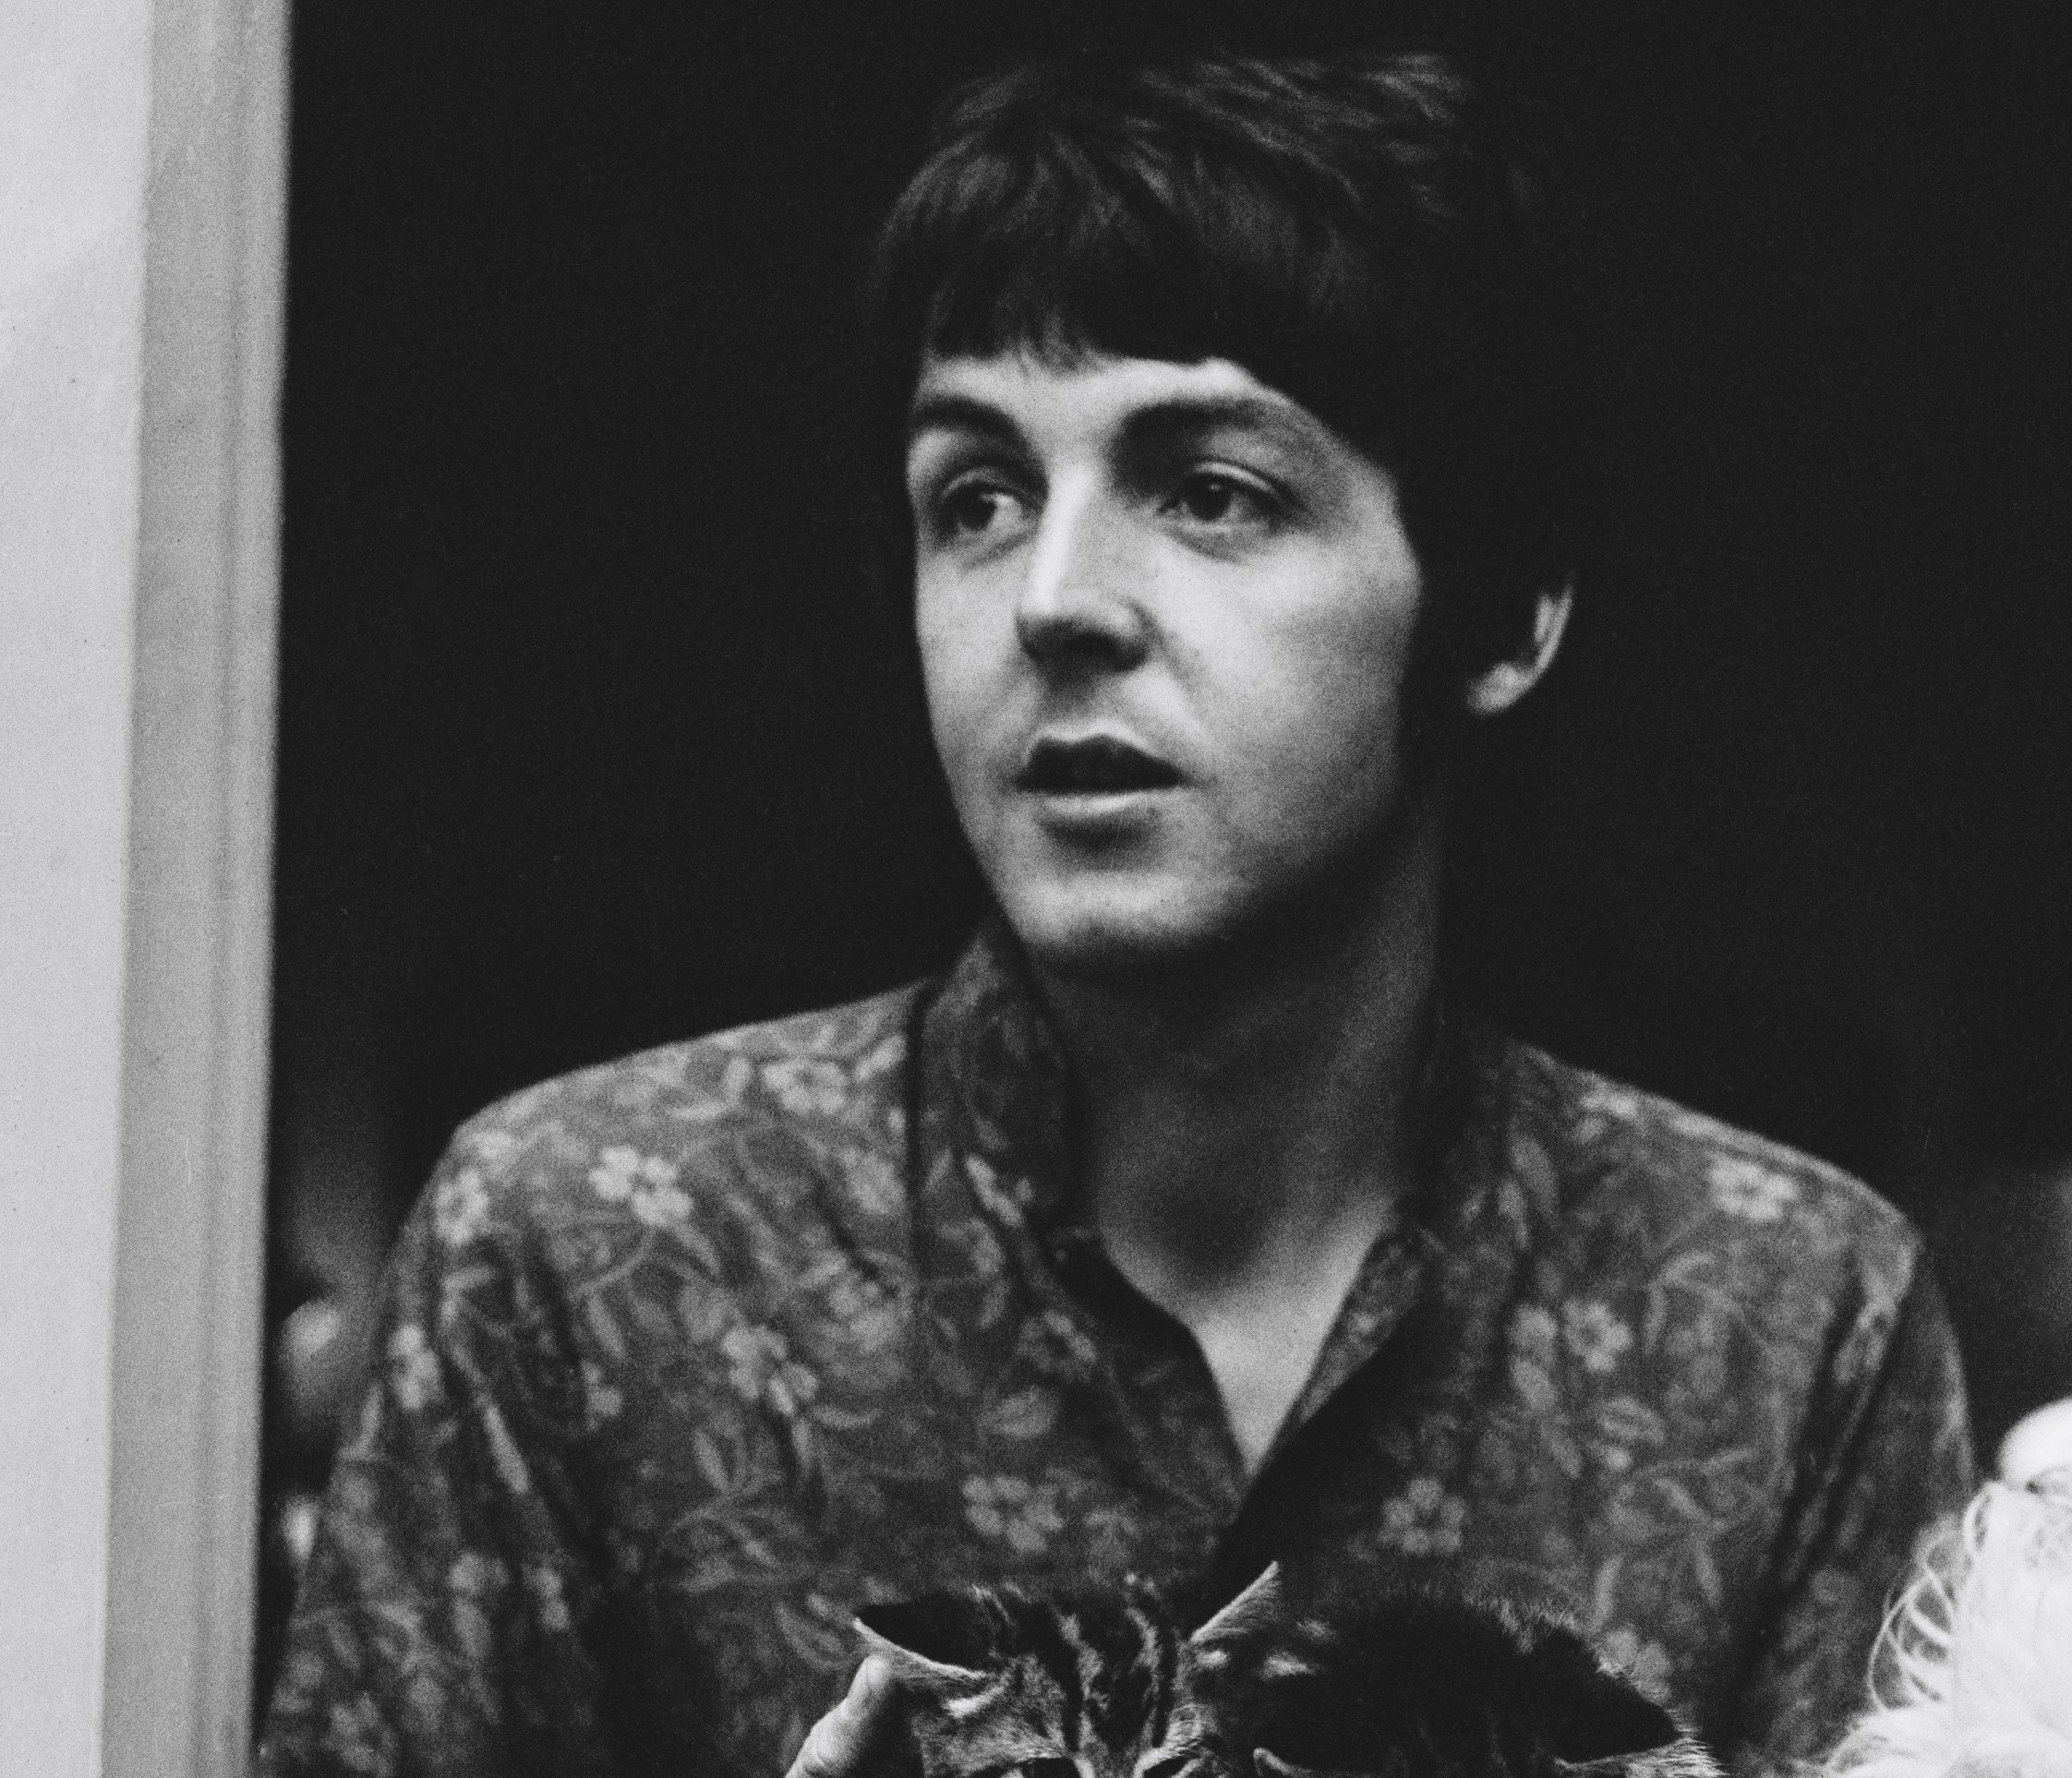 Paul McCartney in black-and-white